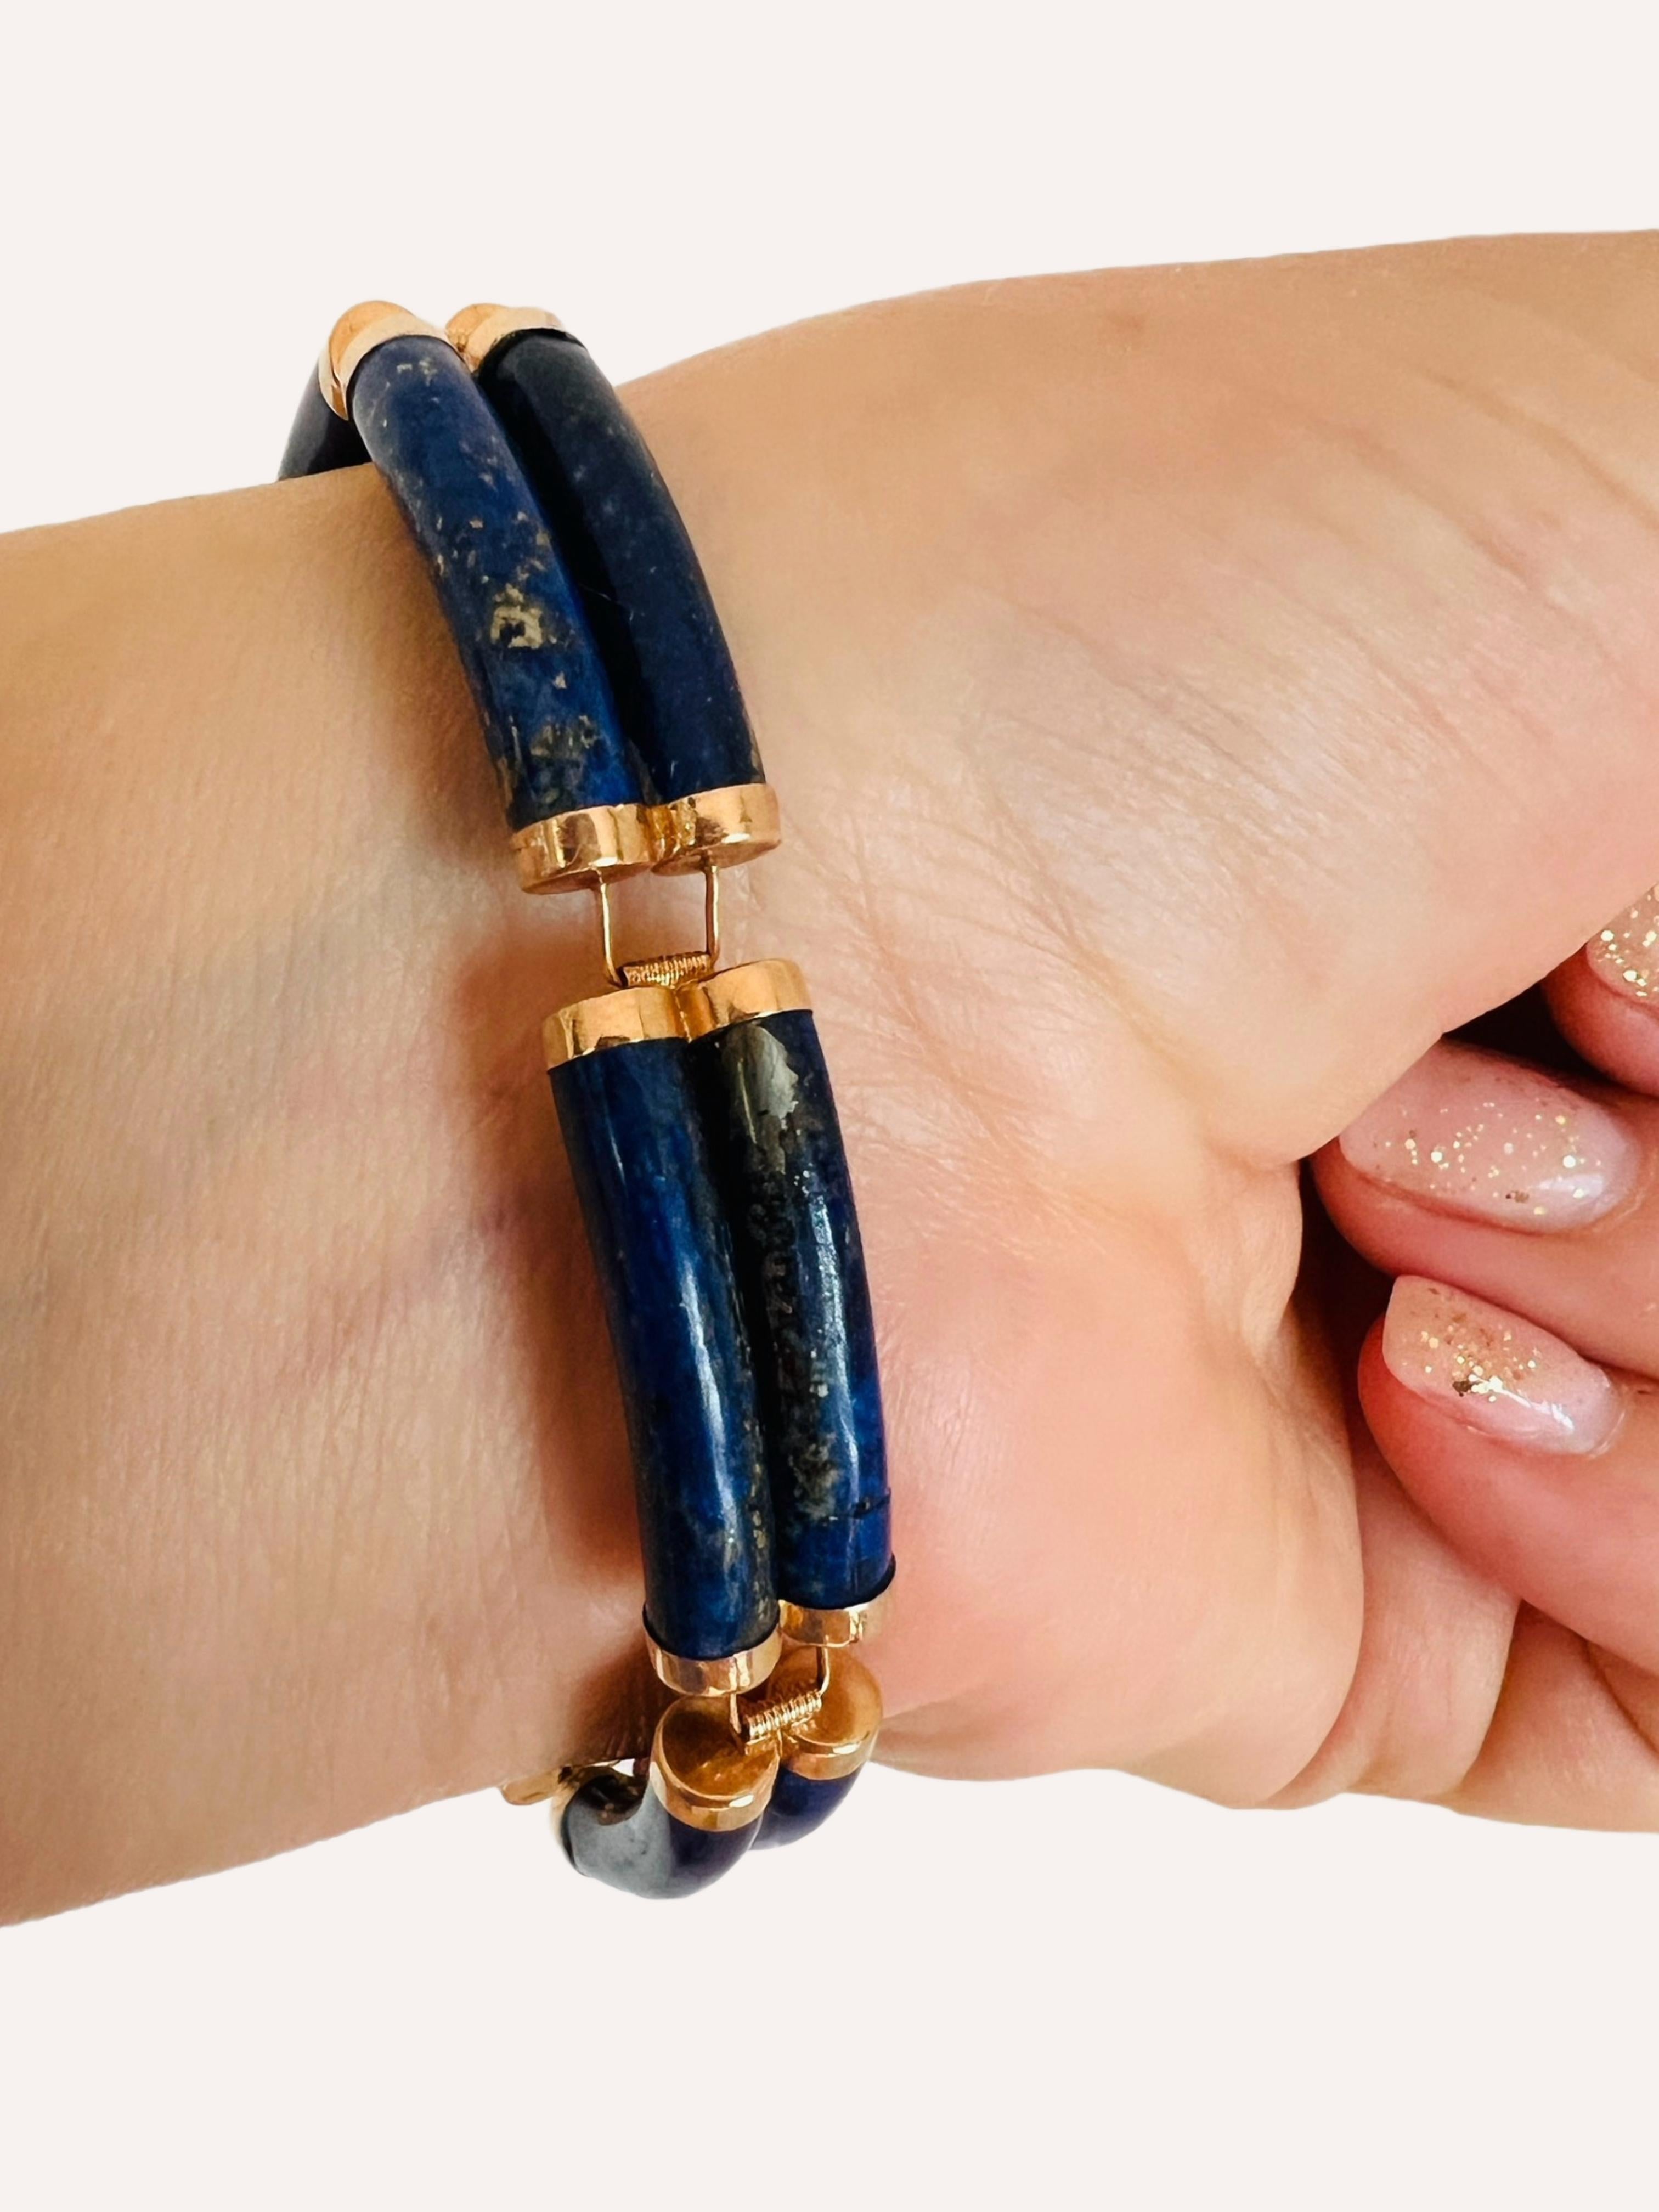 Elevate your style with a touch of good fortune. This bracelet features a box clasp adorned with the Chinese character for good luck, surrounded by double rows of rectangular lapis stations. The curved lapis stones are topped with 14kt yellow gold